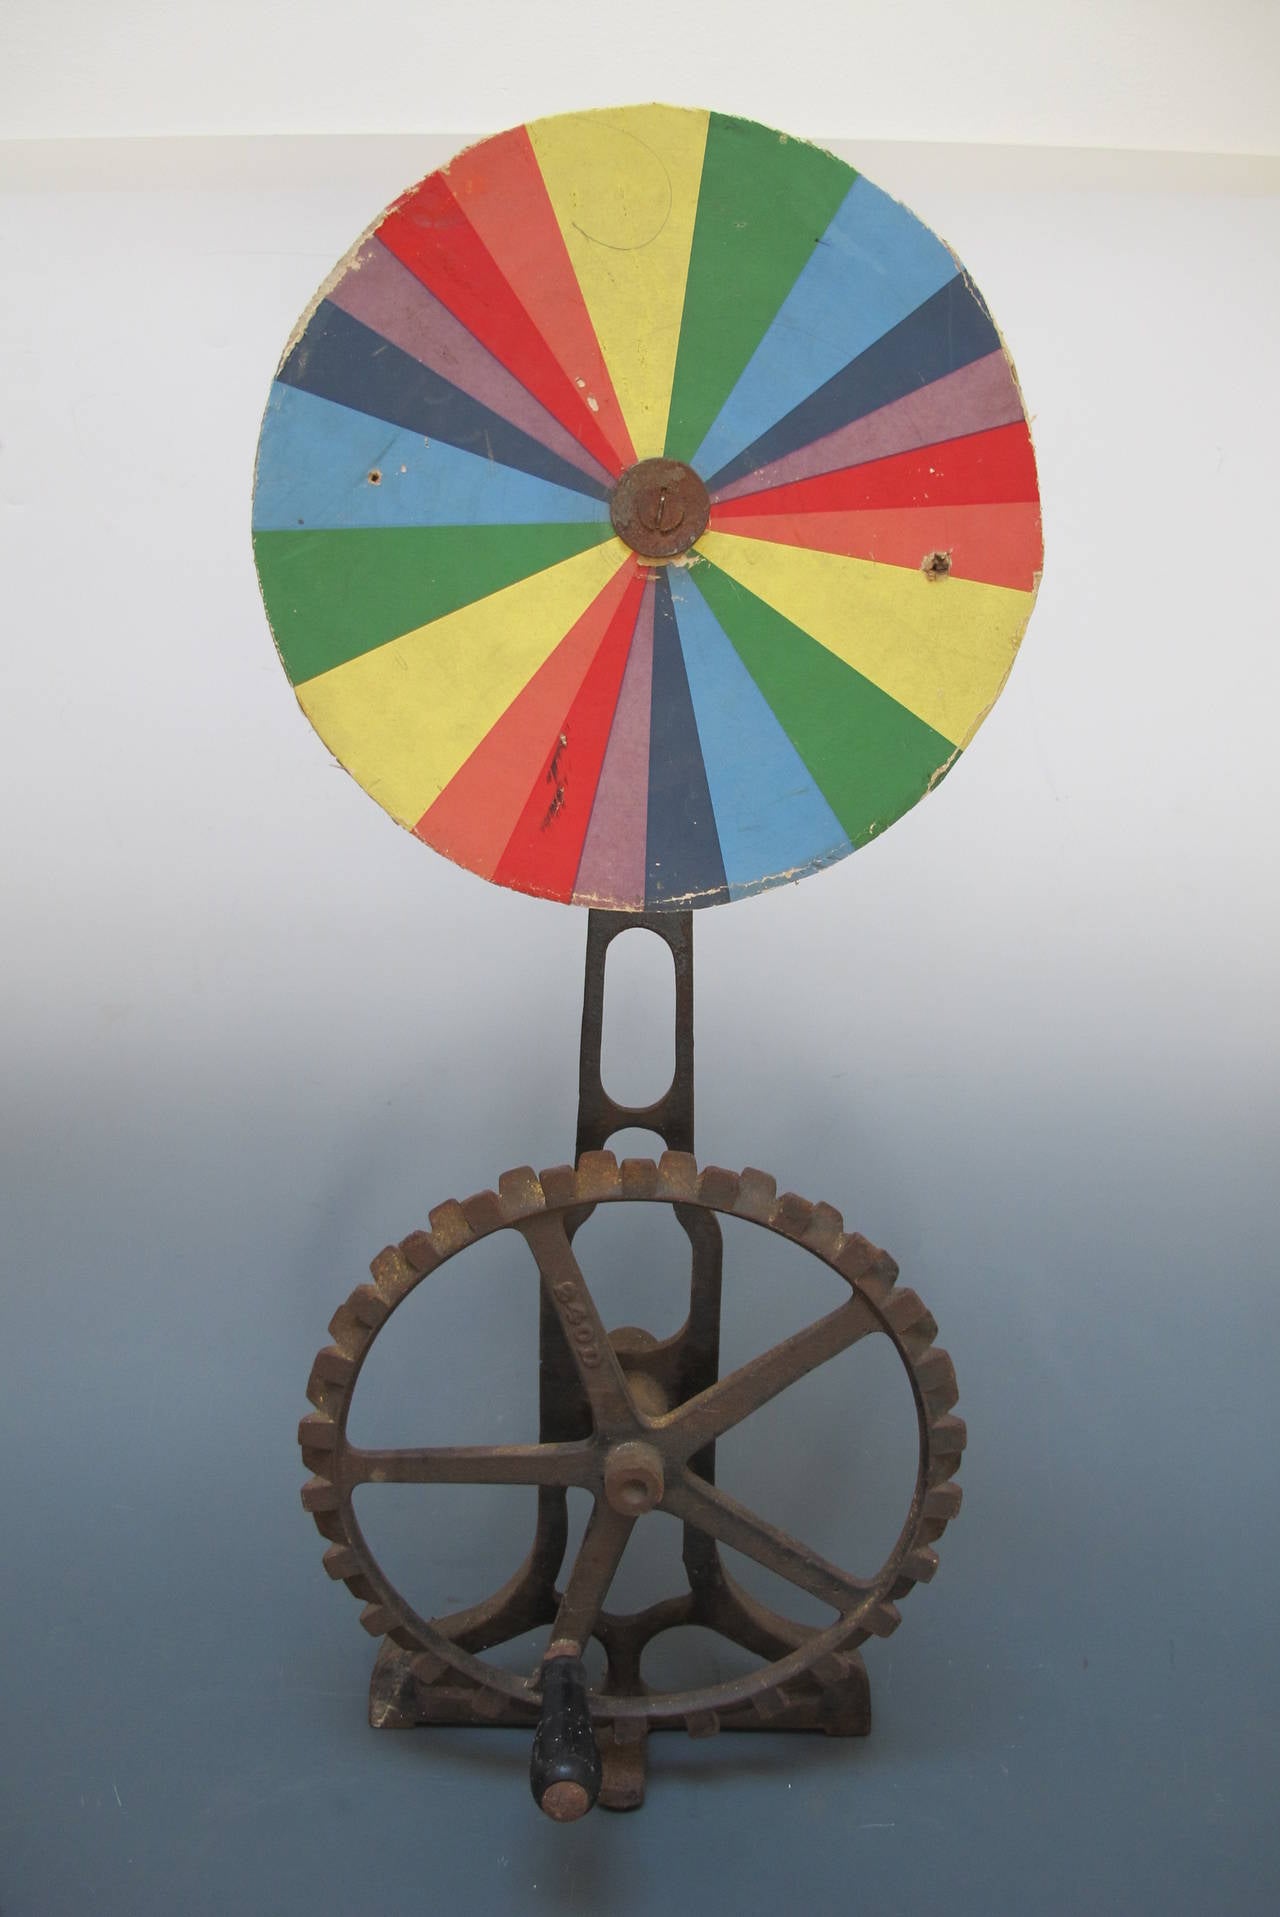 A rare and mysterious color wheel of interesting proportions fixed to a perforated metal disc backing attached to a cast iron base structure. On the lower part is a gear form with wooden hand crank. Oddly the upper and lower wheels are not